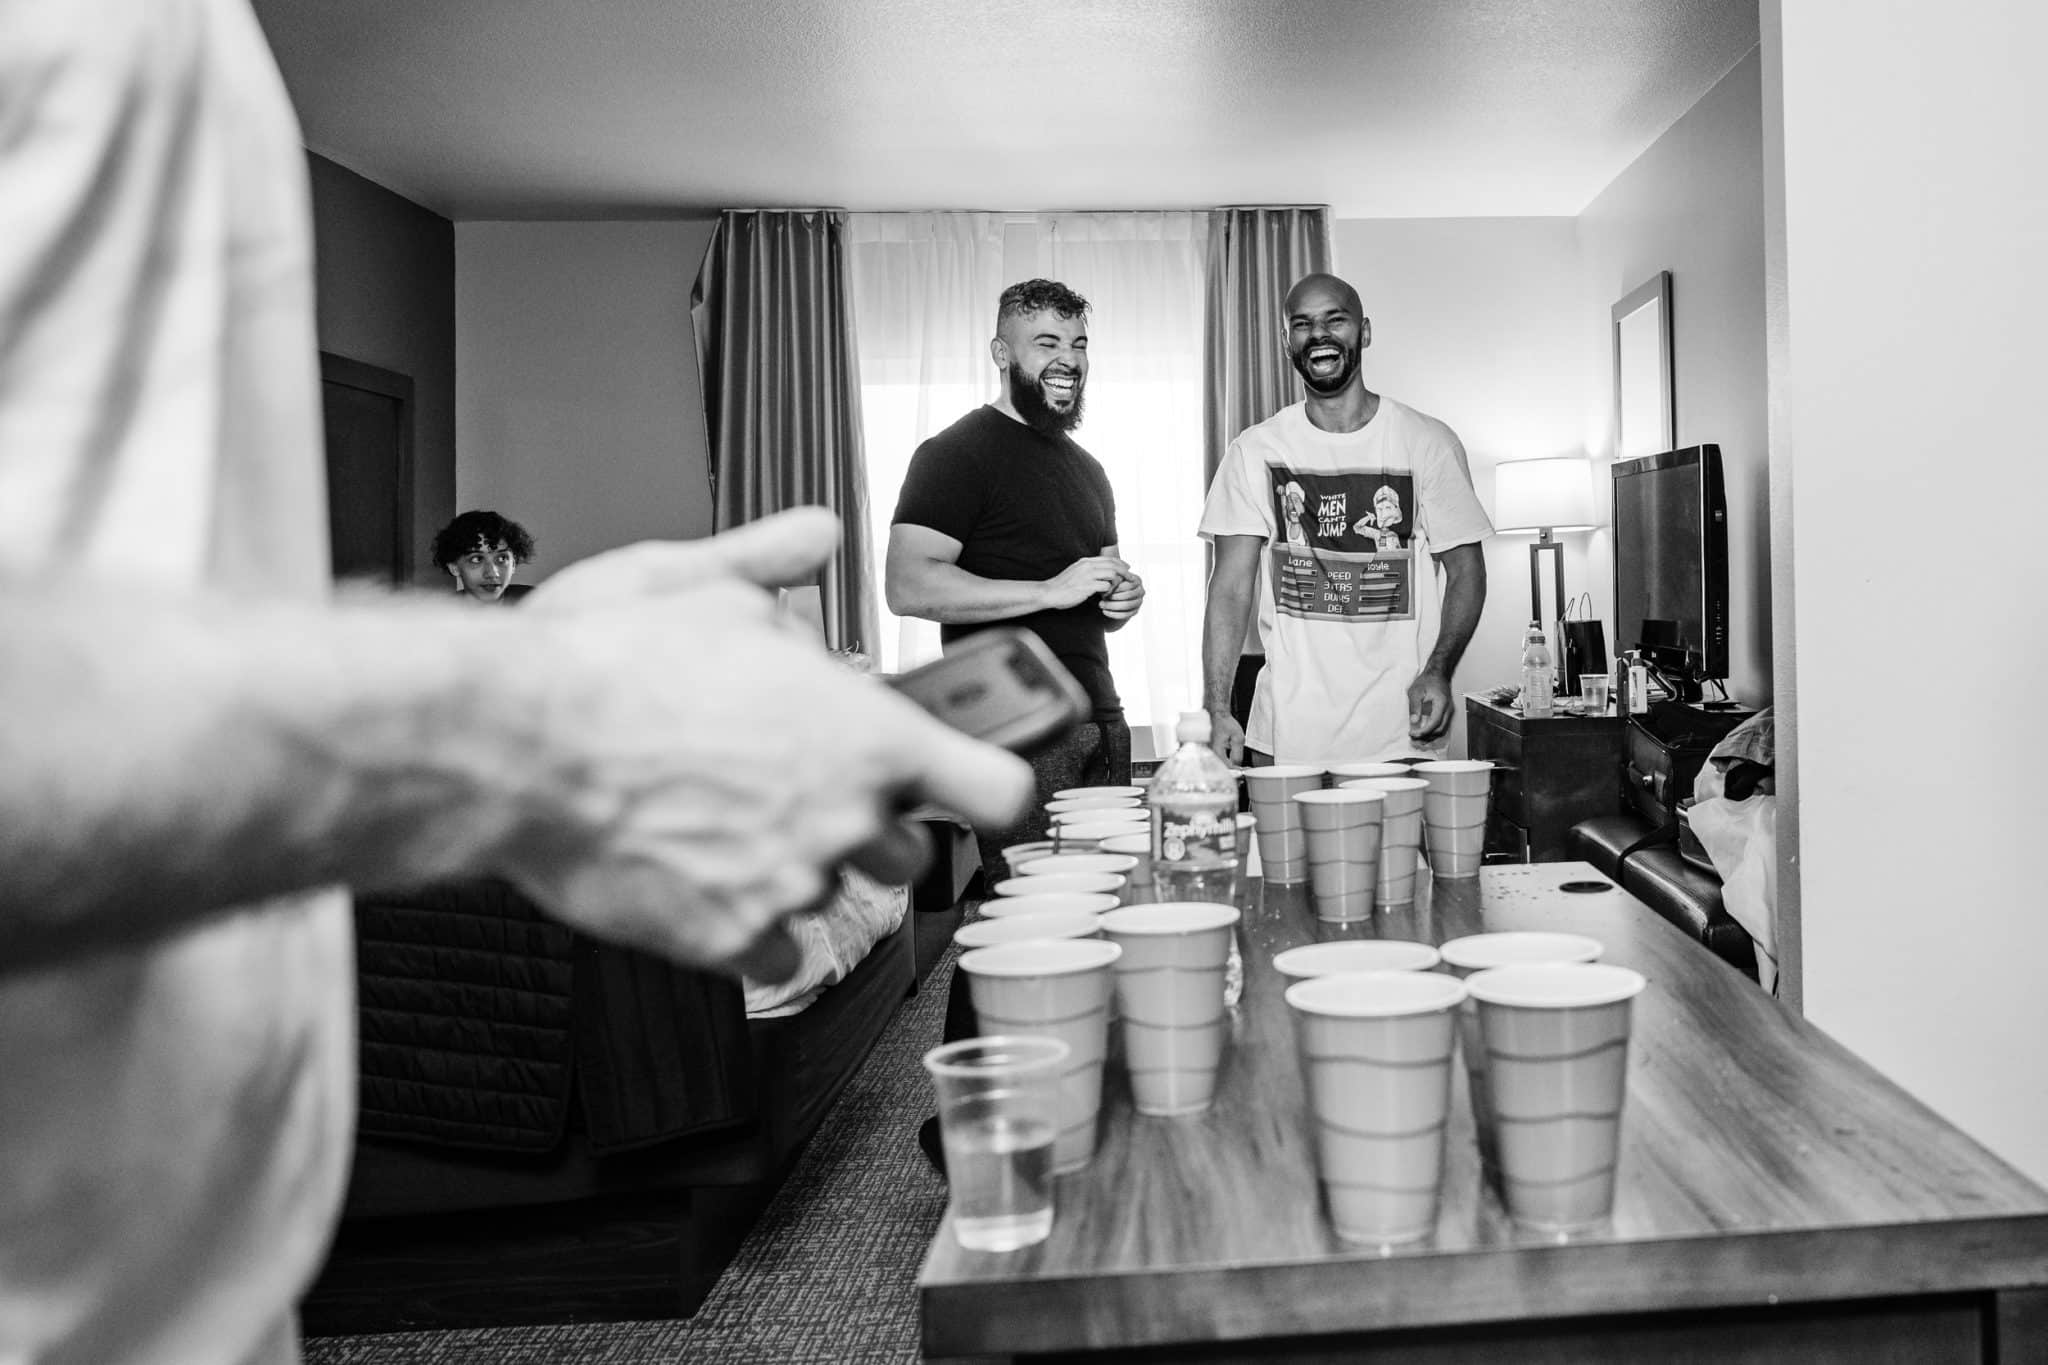 blac and white image of guys playing beer pong at a table